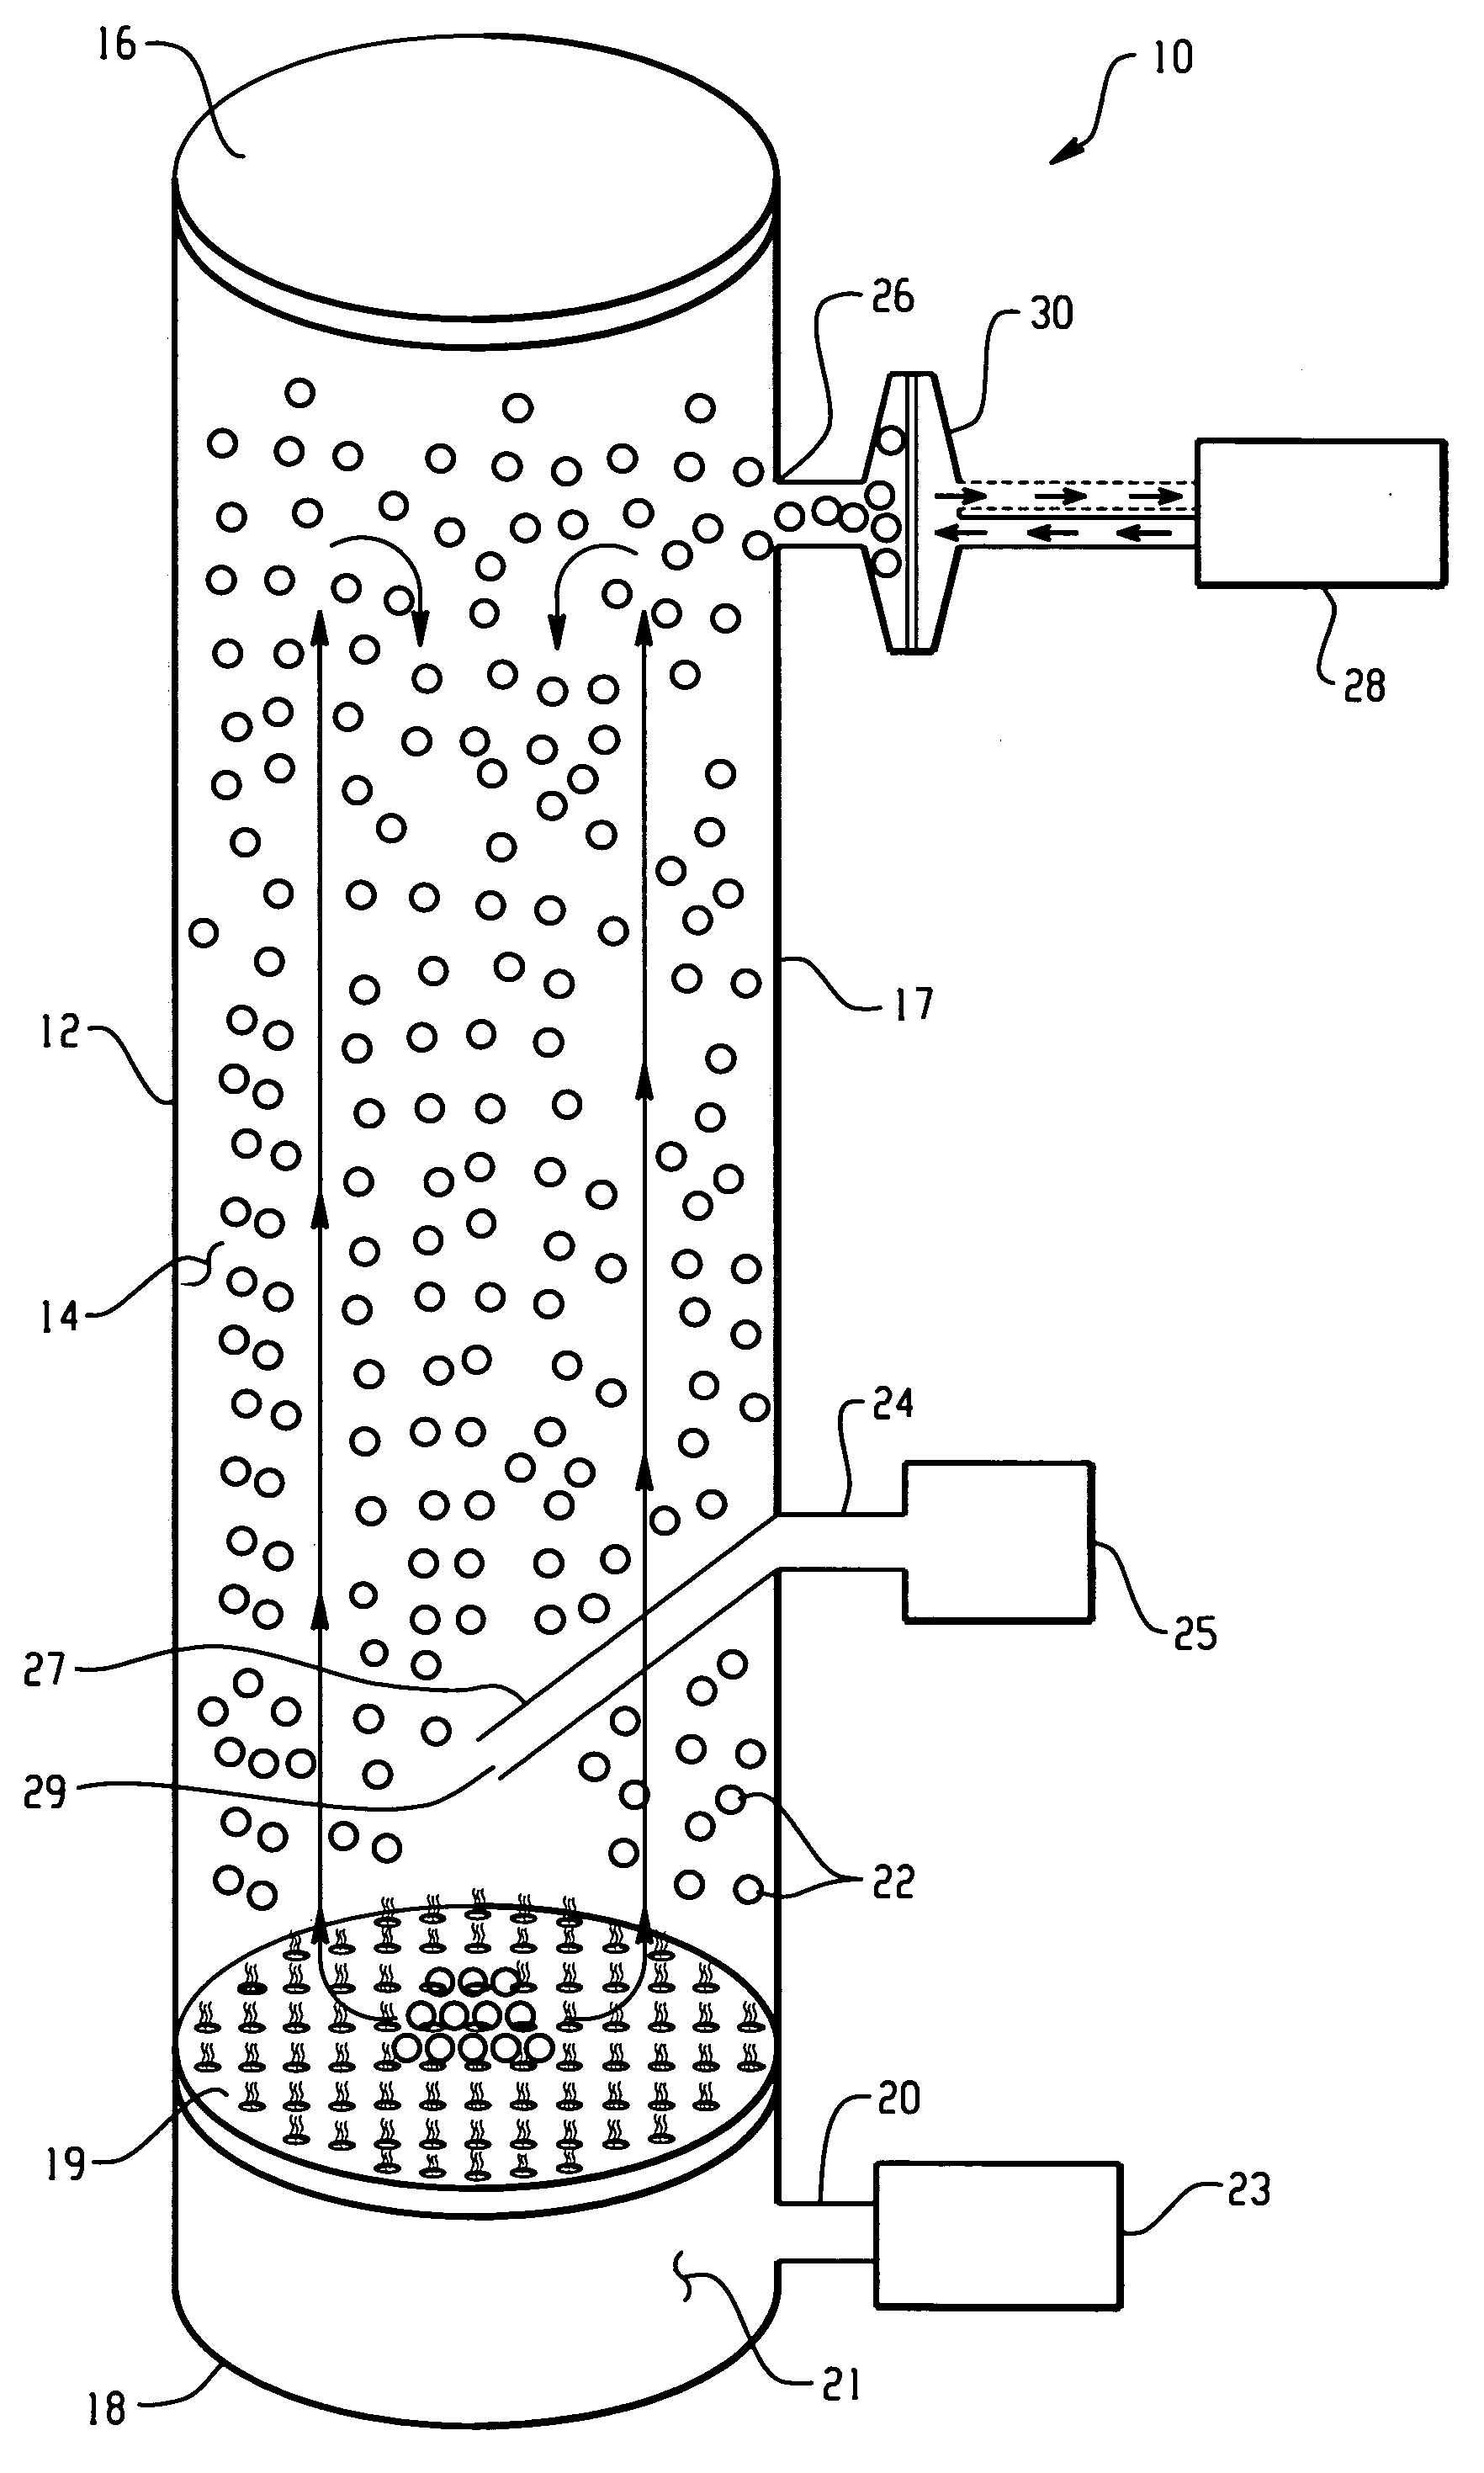 Fluidized-bed reactor system